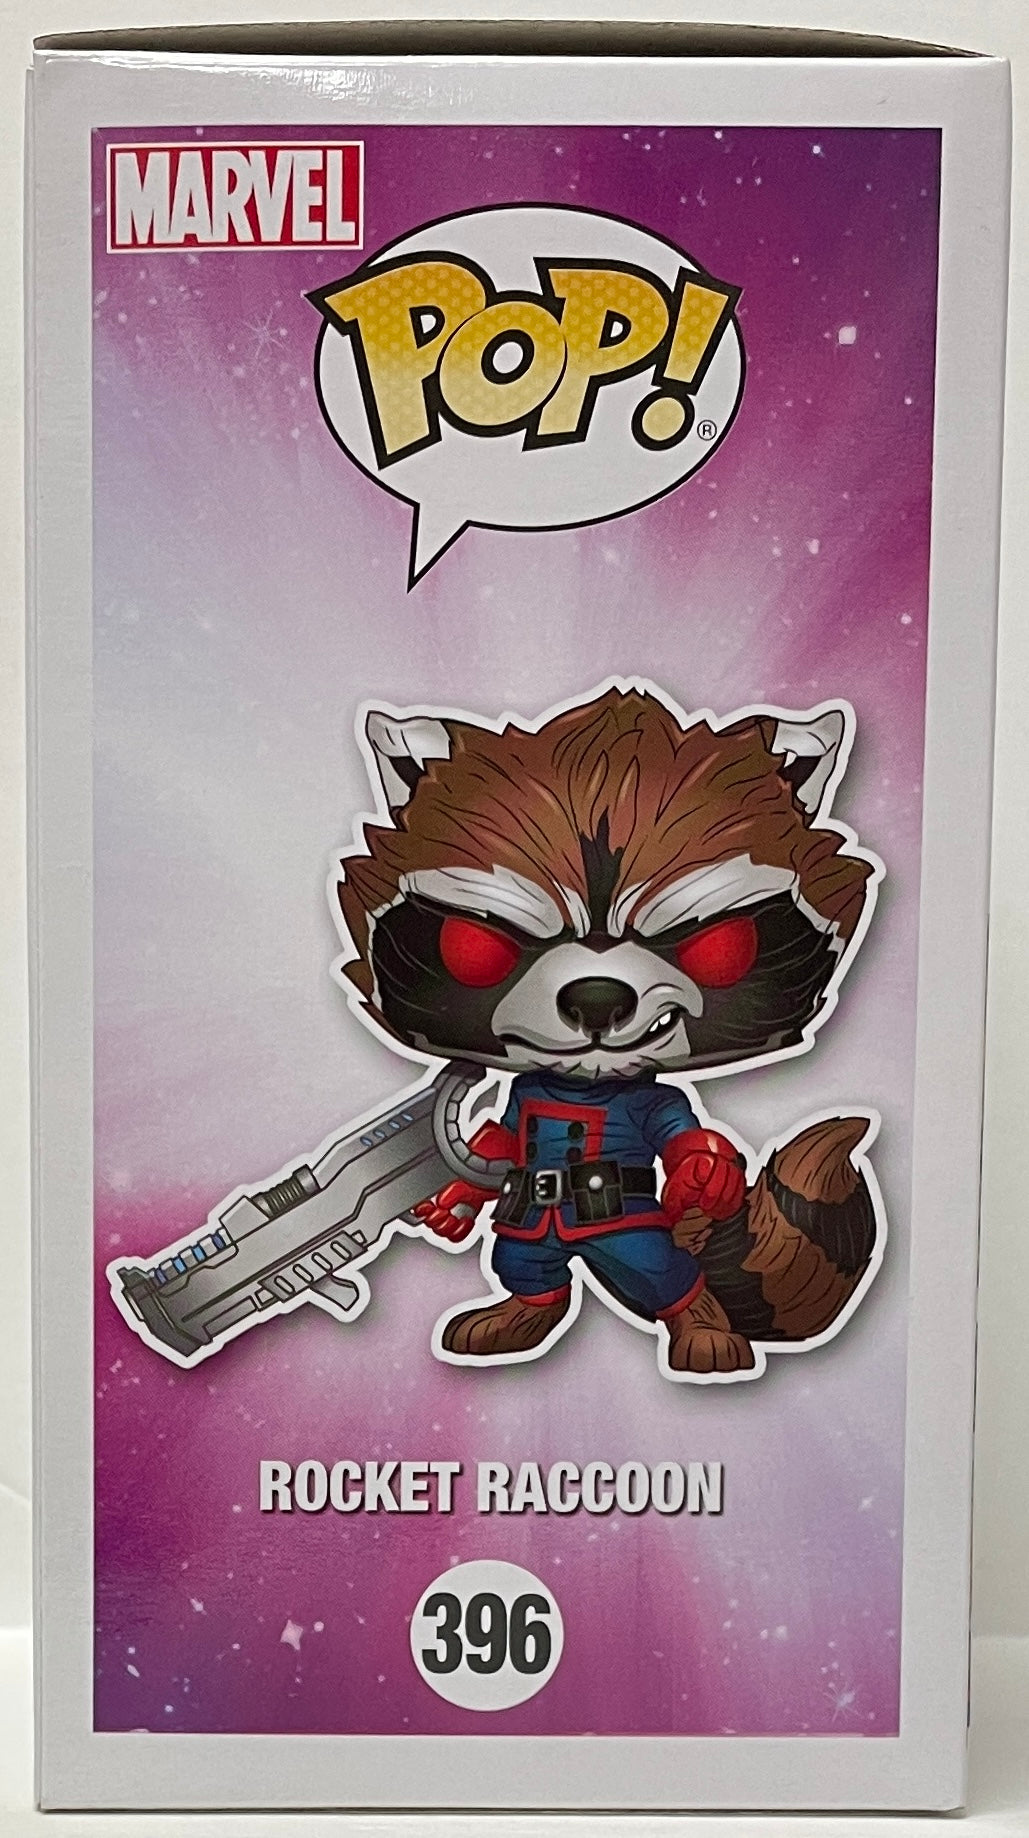 Funko pop Guardians of the Galaxy Rocket Raccoon px Preview NYCC